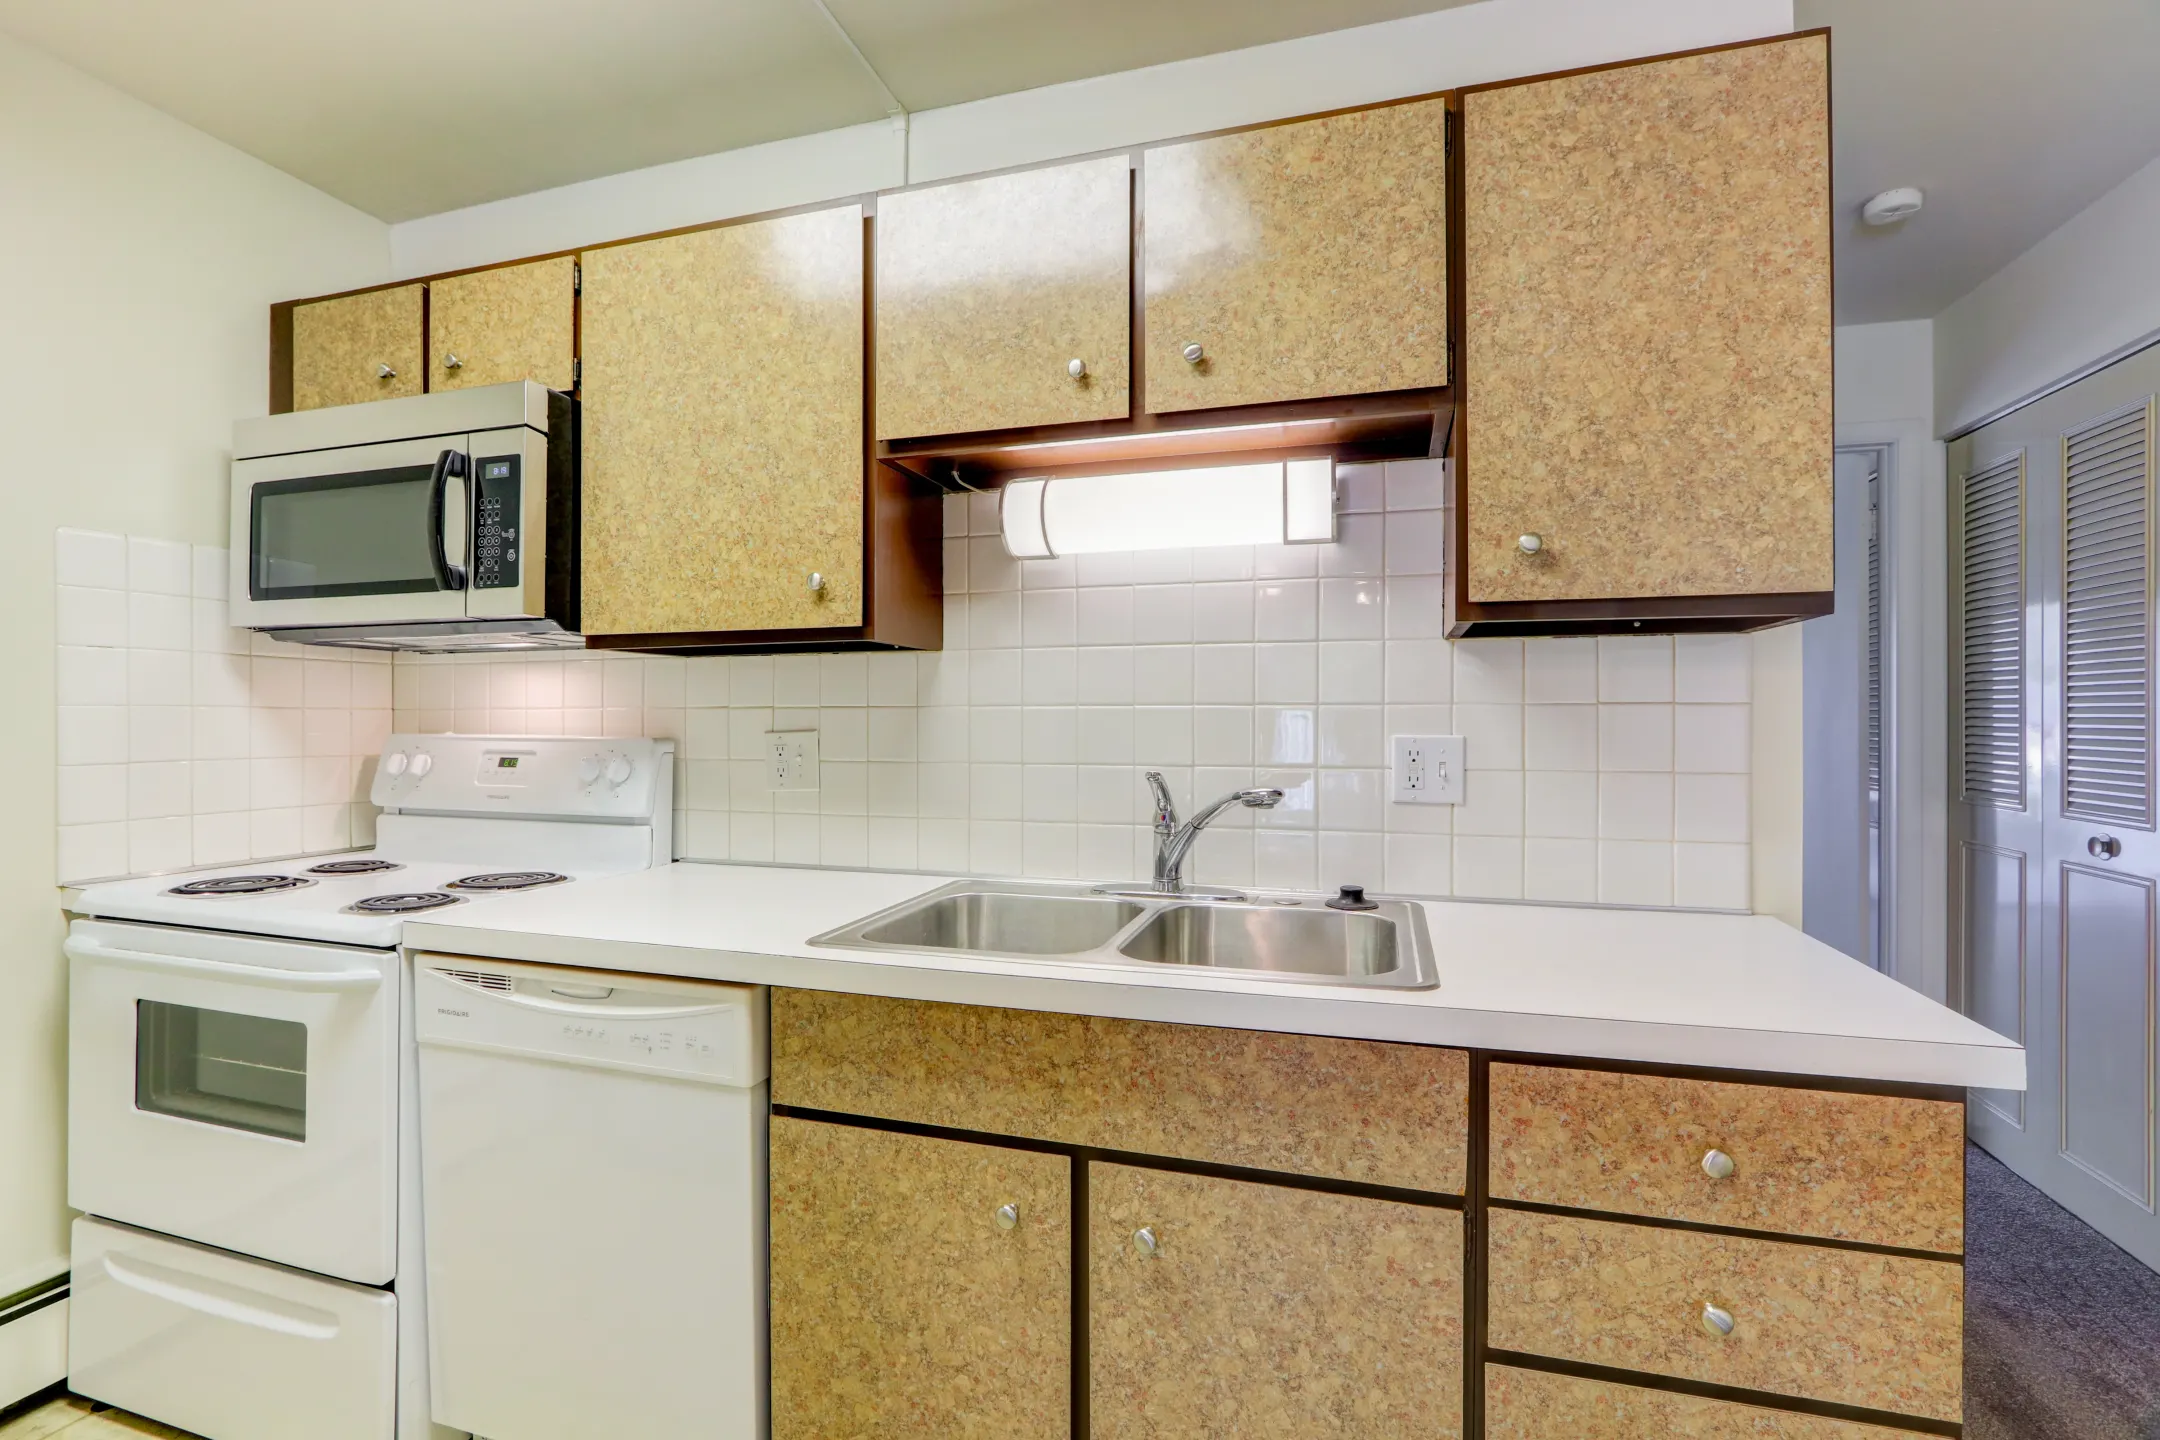 Kitchen - The Apartments on 2nd Street - Cuyahoga Falls, OH